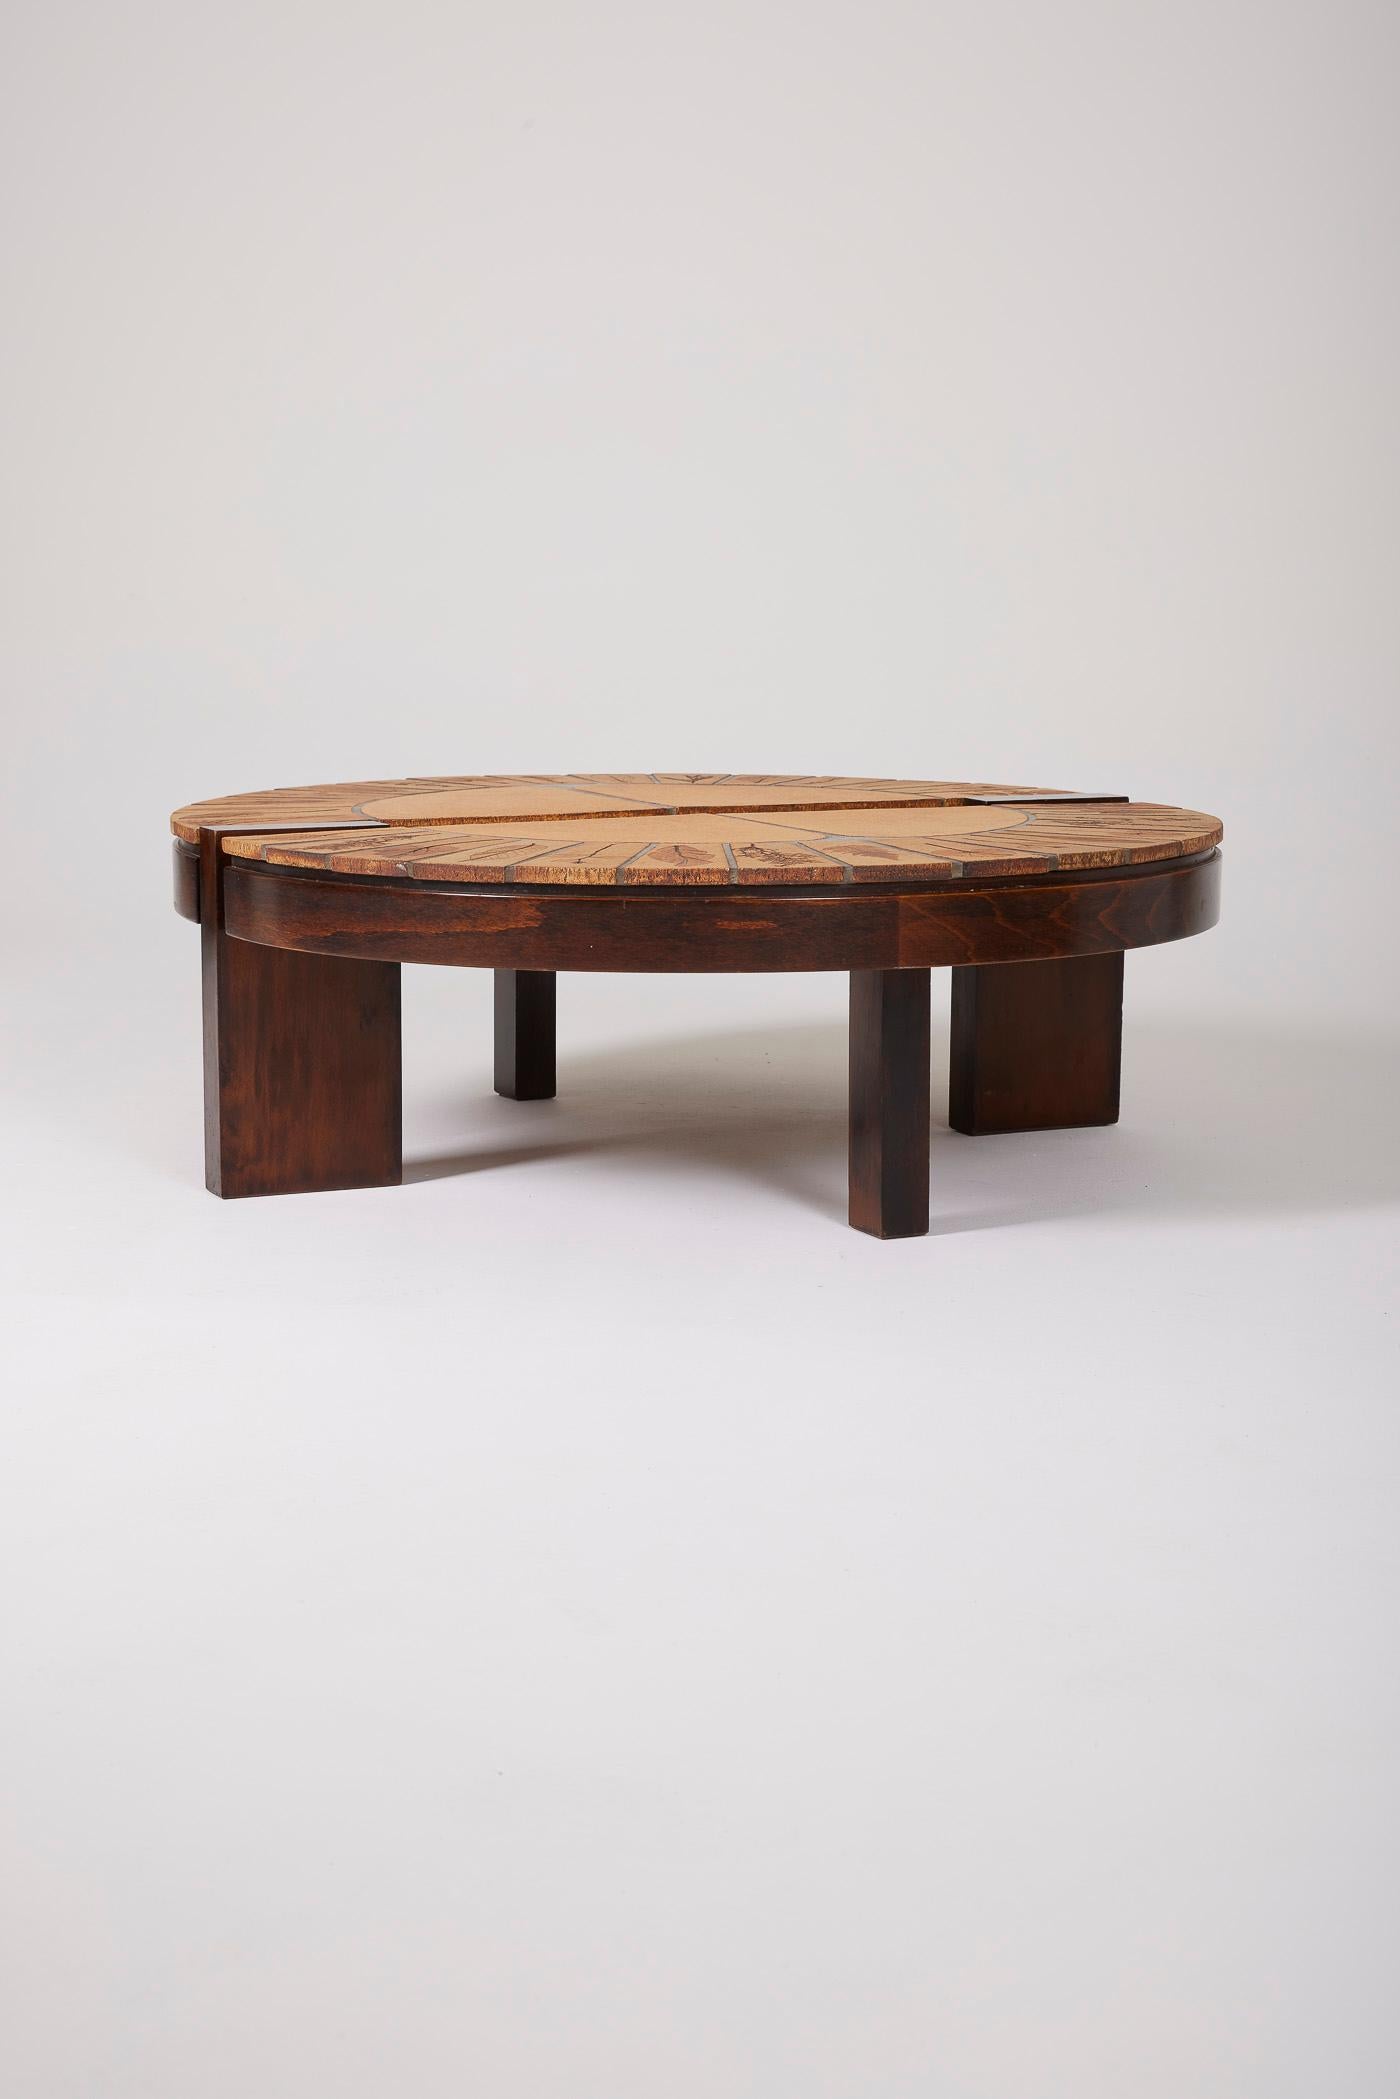 Brutalist Roger Capron coffee table